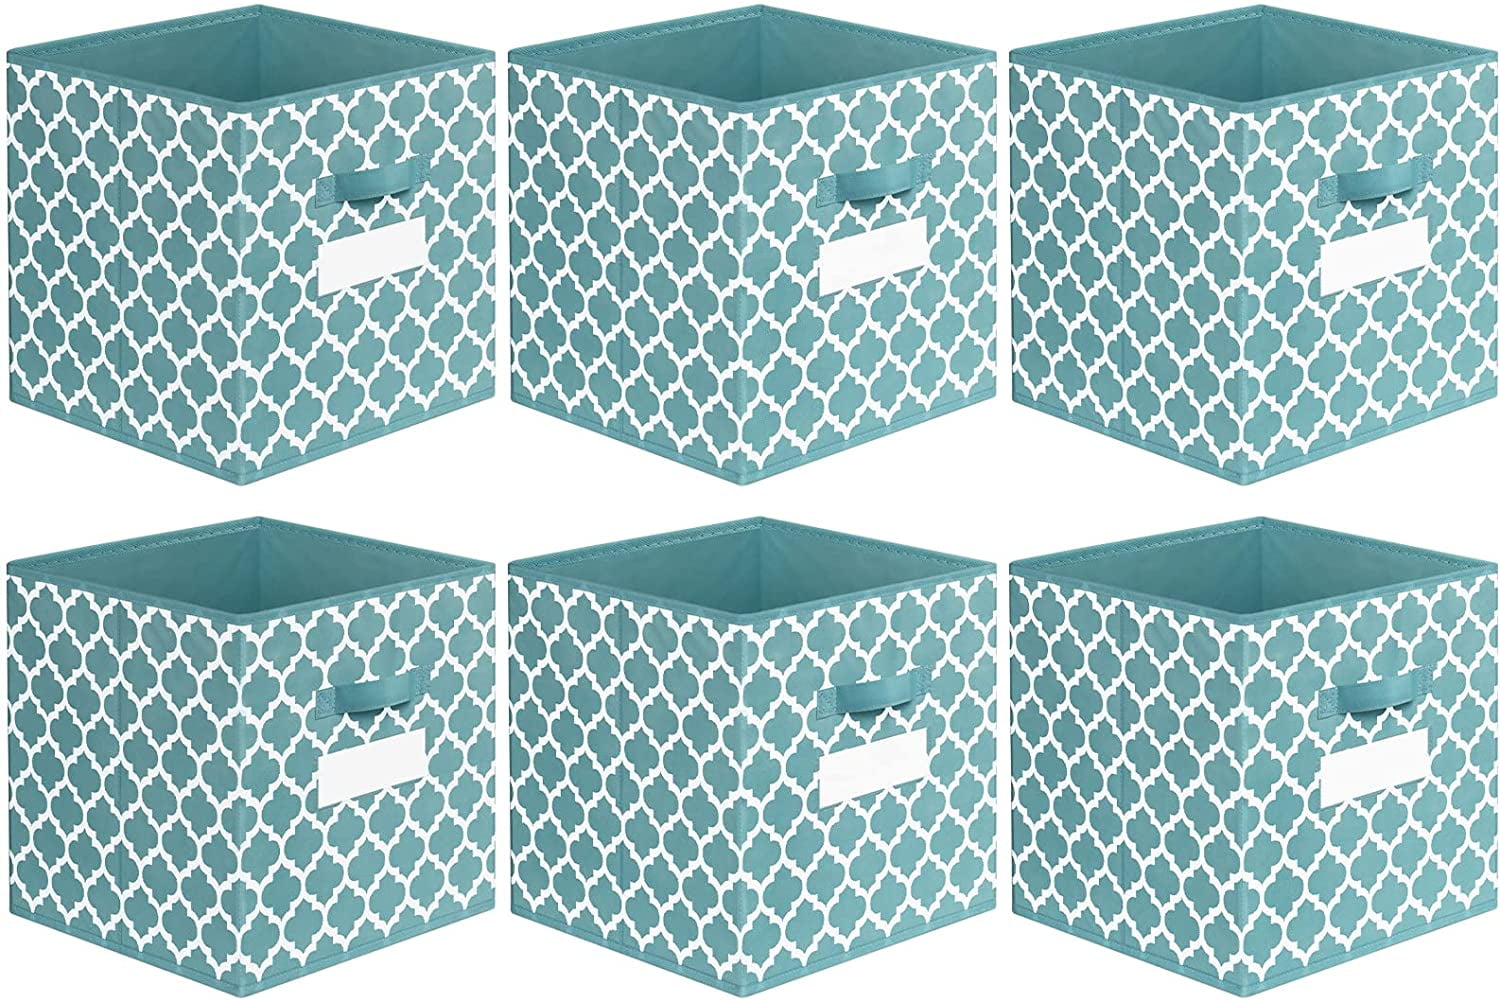 Blue Fabric Storage Bins Cubes Baskets Containers Set of 6 